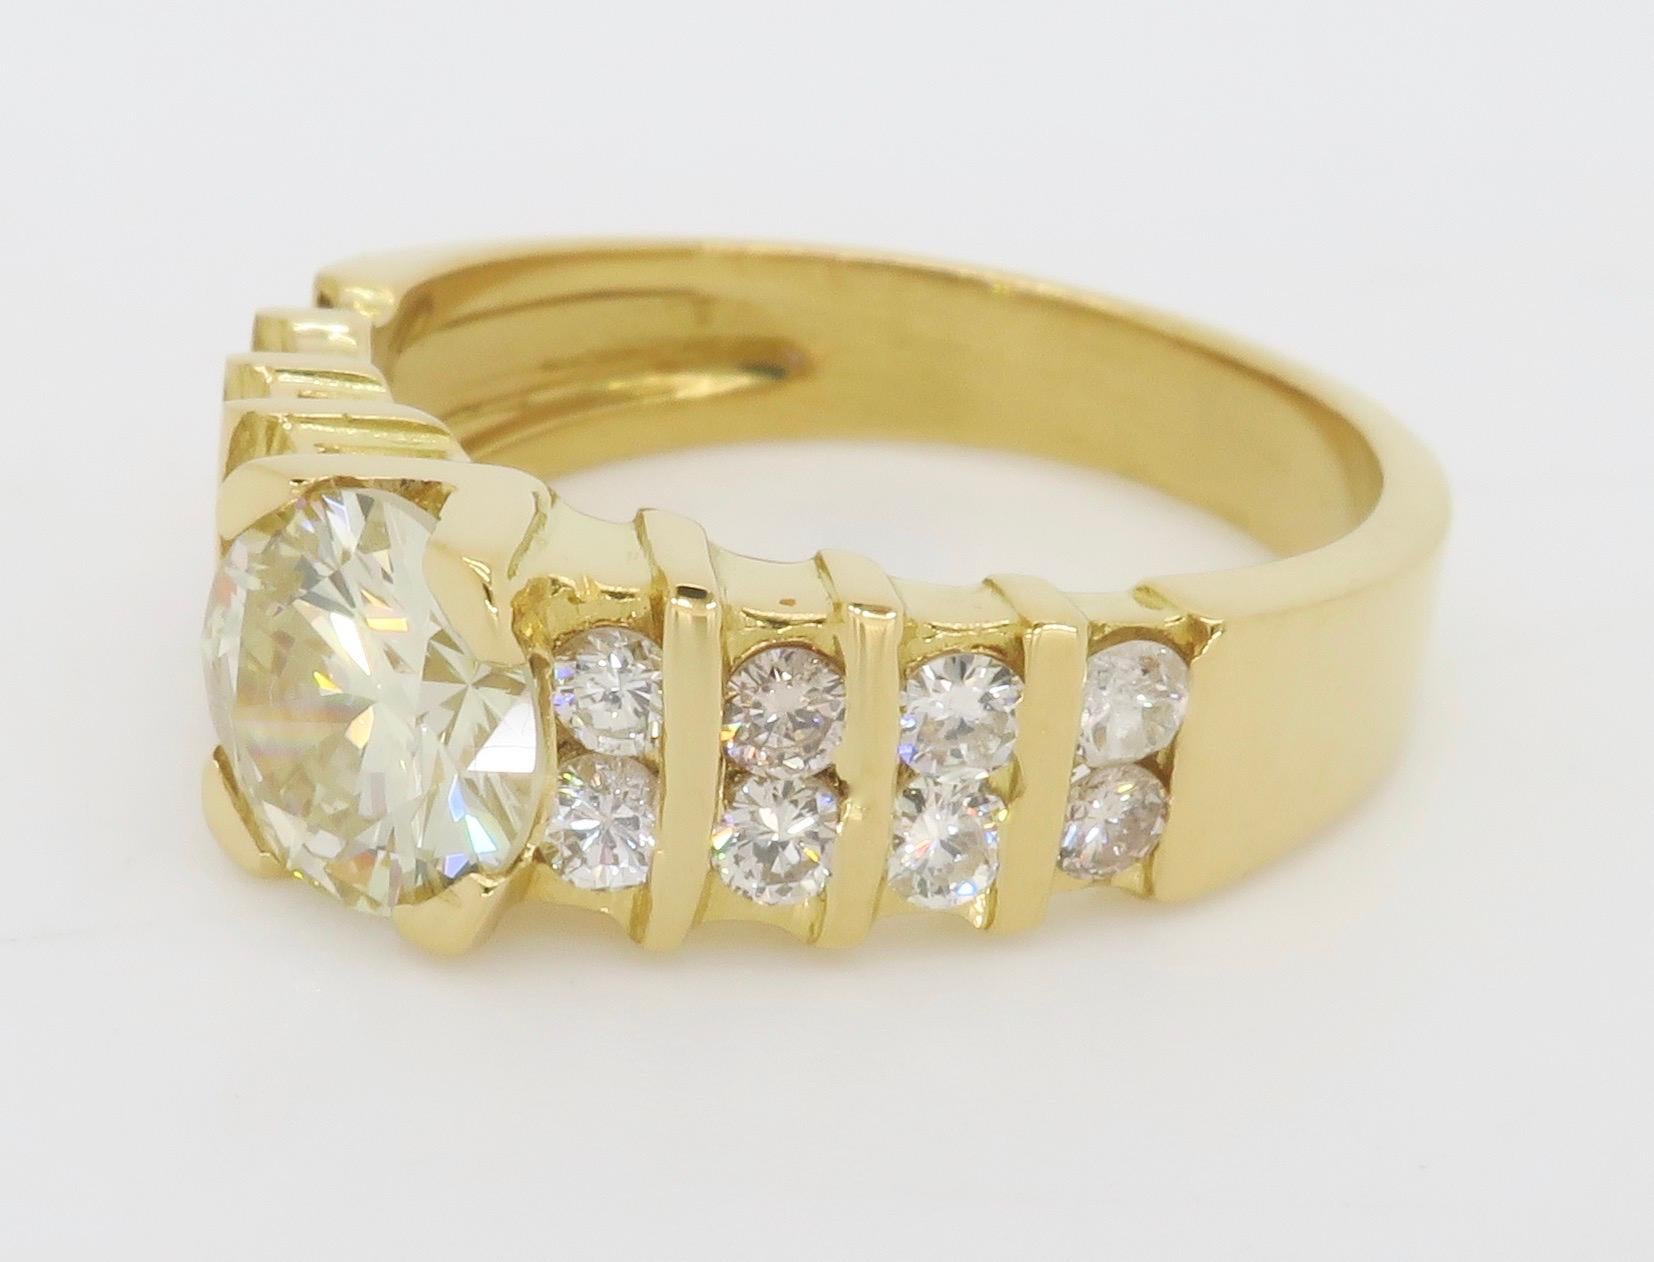 Women's 1.54ctw Diamond Encrusted Ring in 14k Yellow Gold For Sale